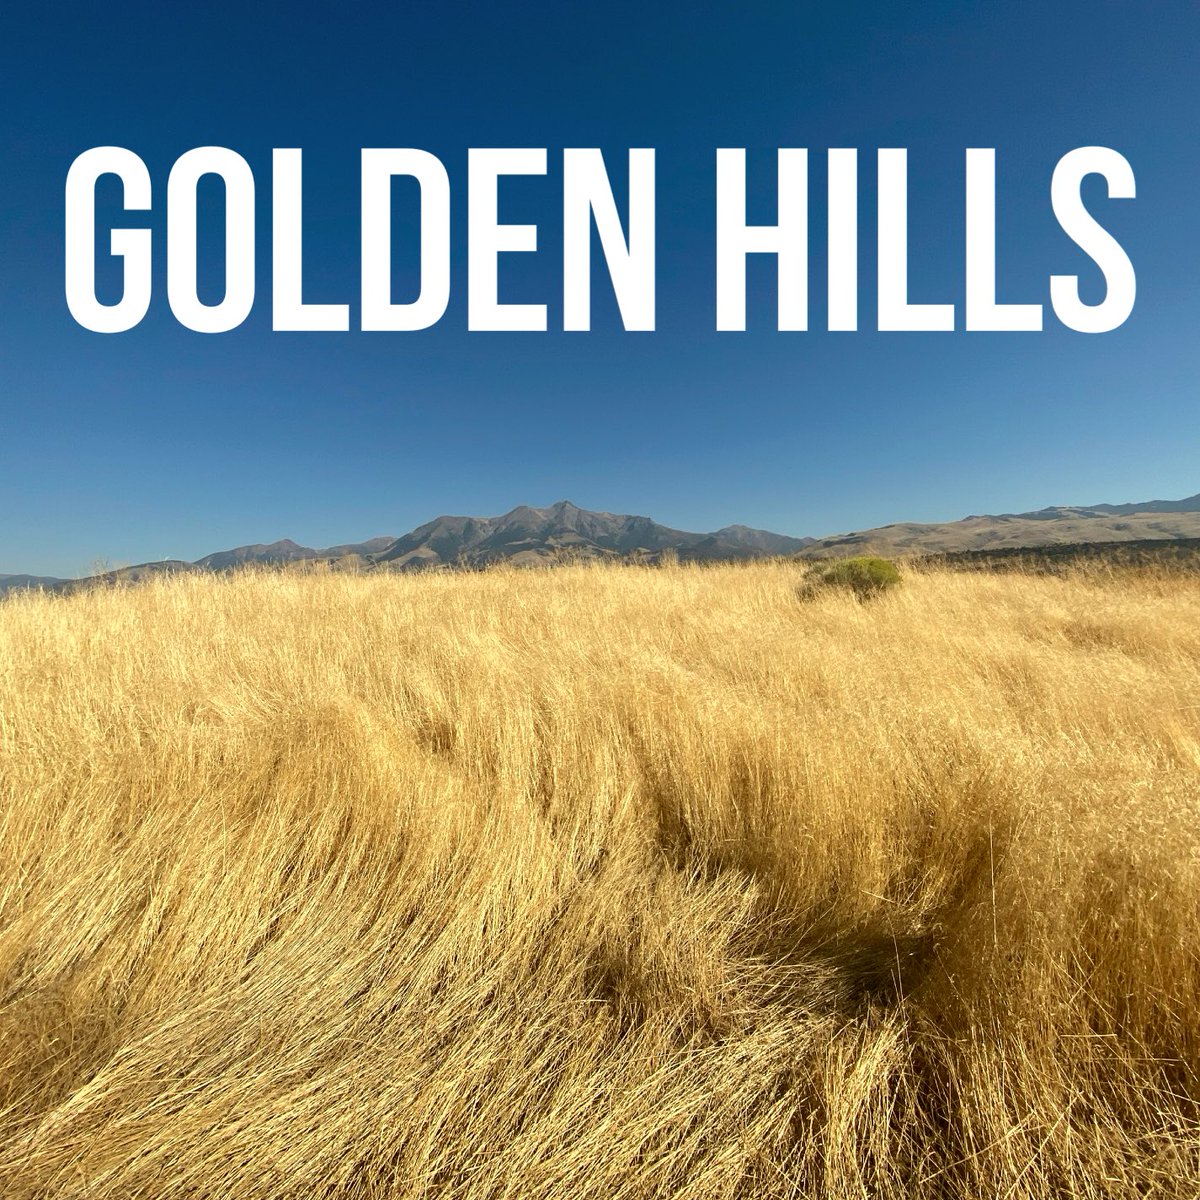 Good morning! My new single Golden Hills is available now on all streaming platforms. Thank you for listening, friends. 🌾

#singersongwriter #originalmusic #newmusic